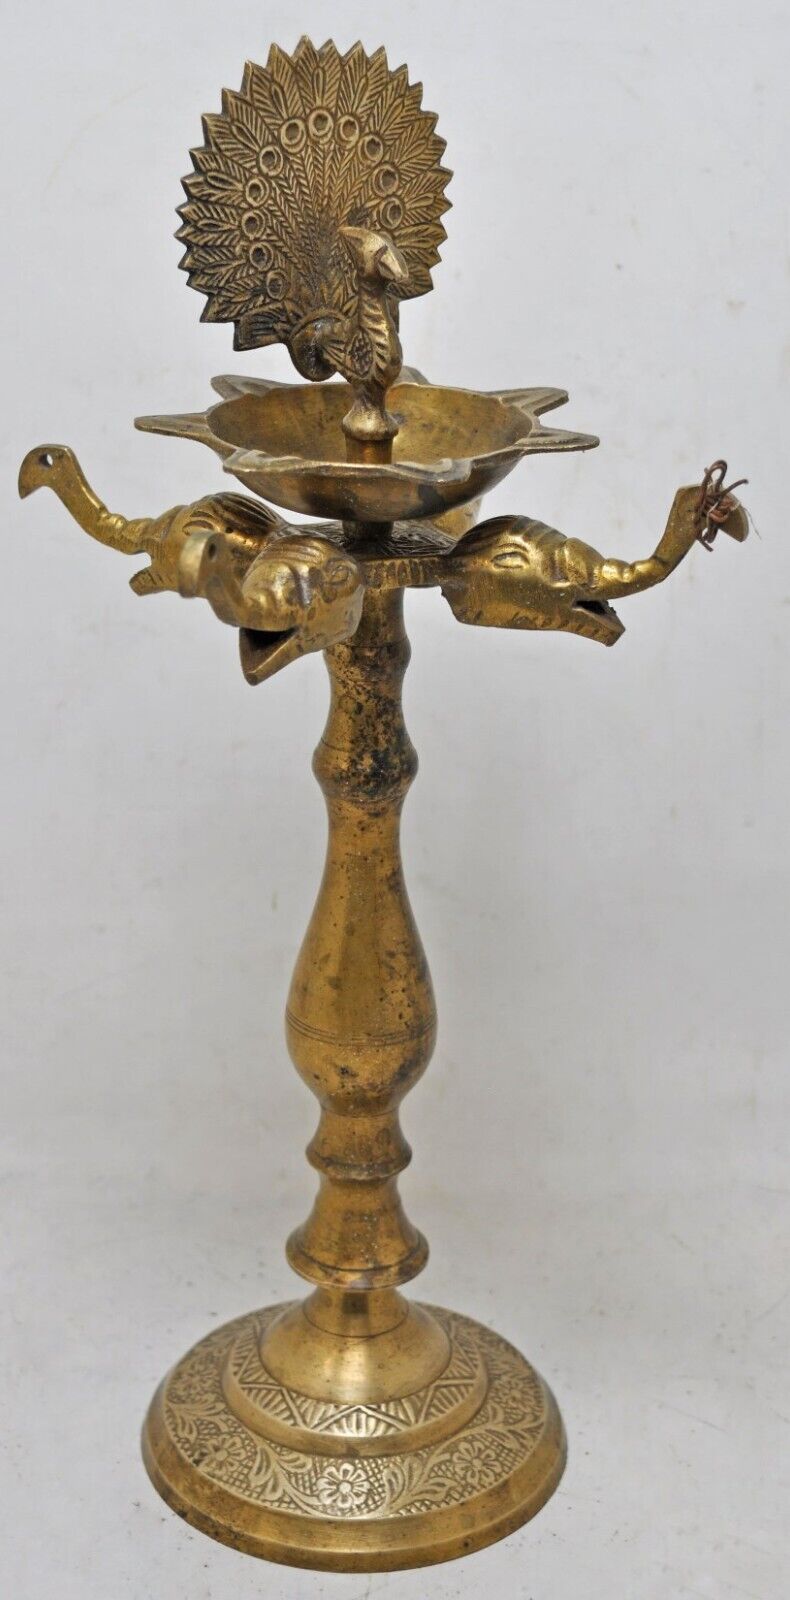 Antique Brass Temple Diya Oil Light Stand Original Old Hand Crafted Engraved